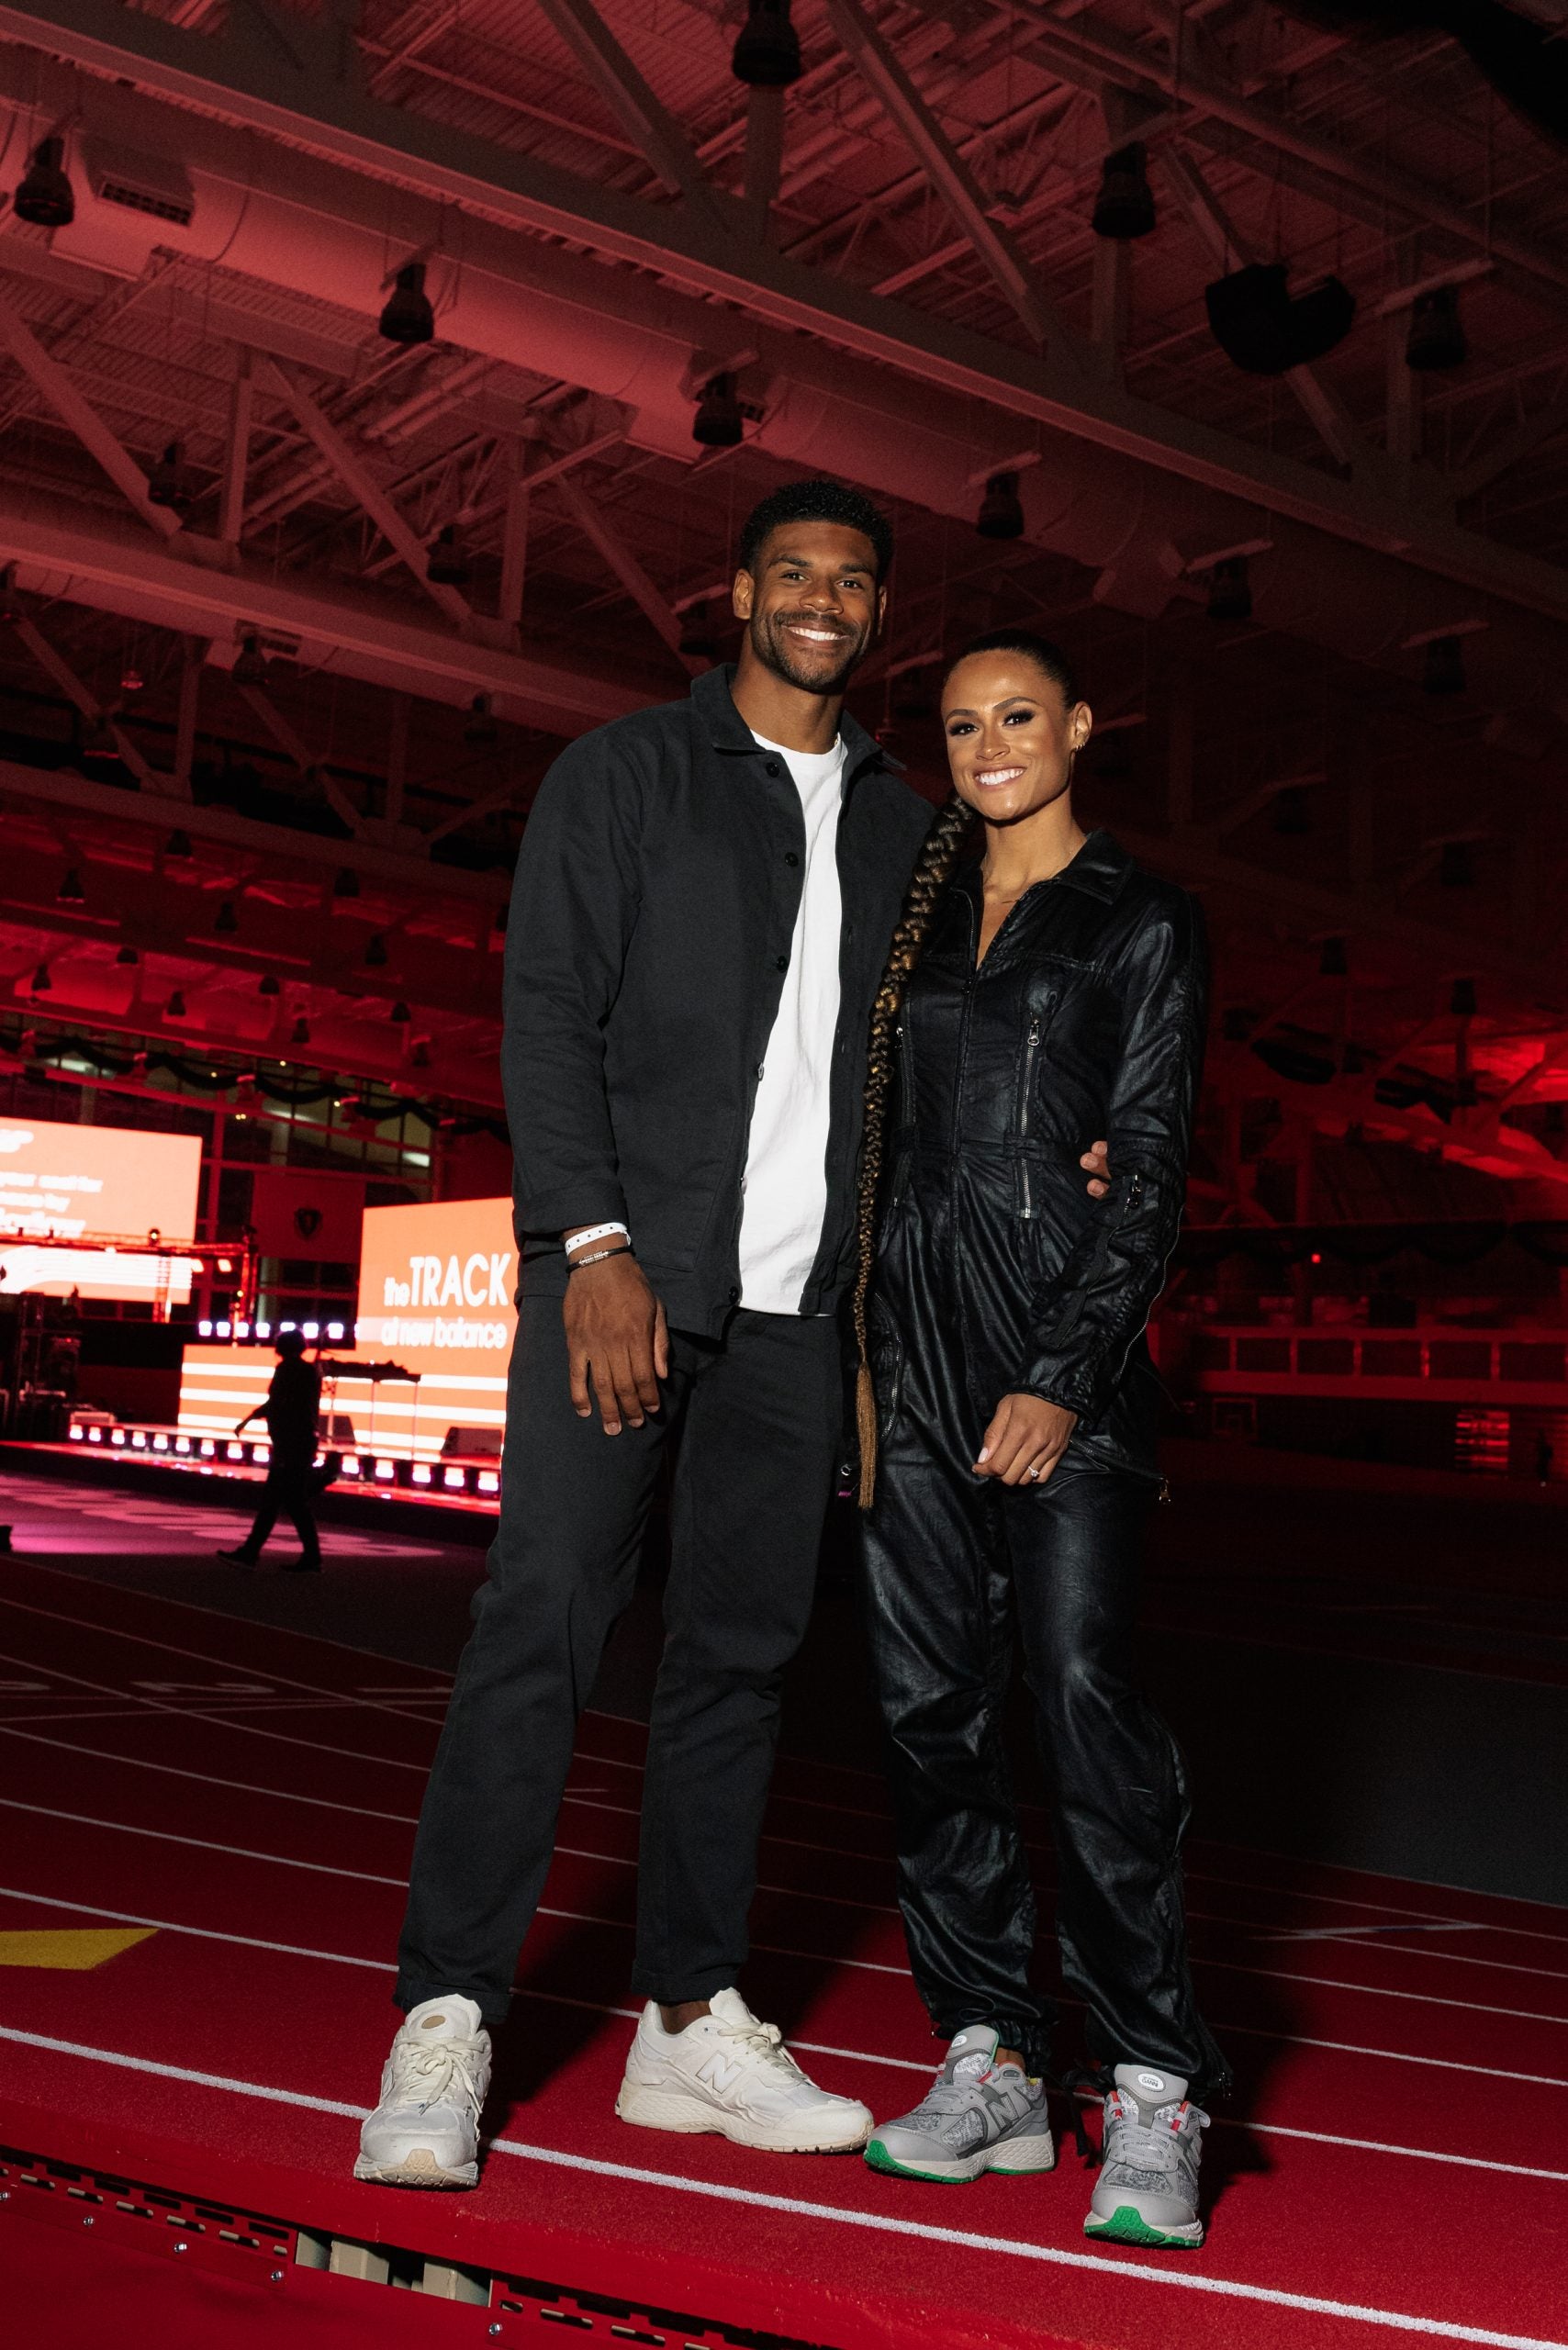 New Balance Launches Multi-Sport Complex, ‘The TRACK,’ With A Star-Studded Event